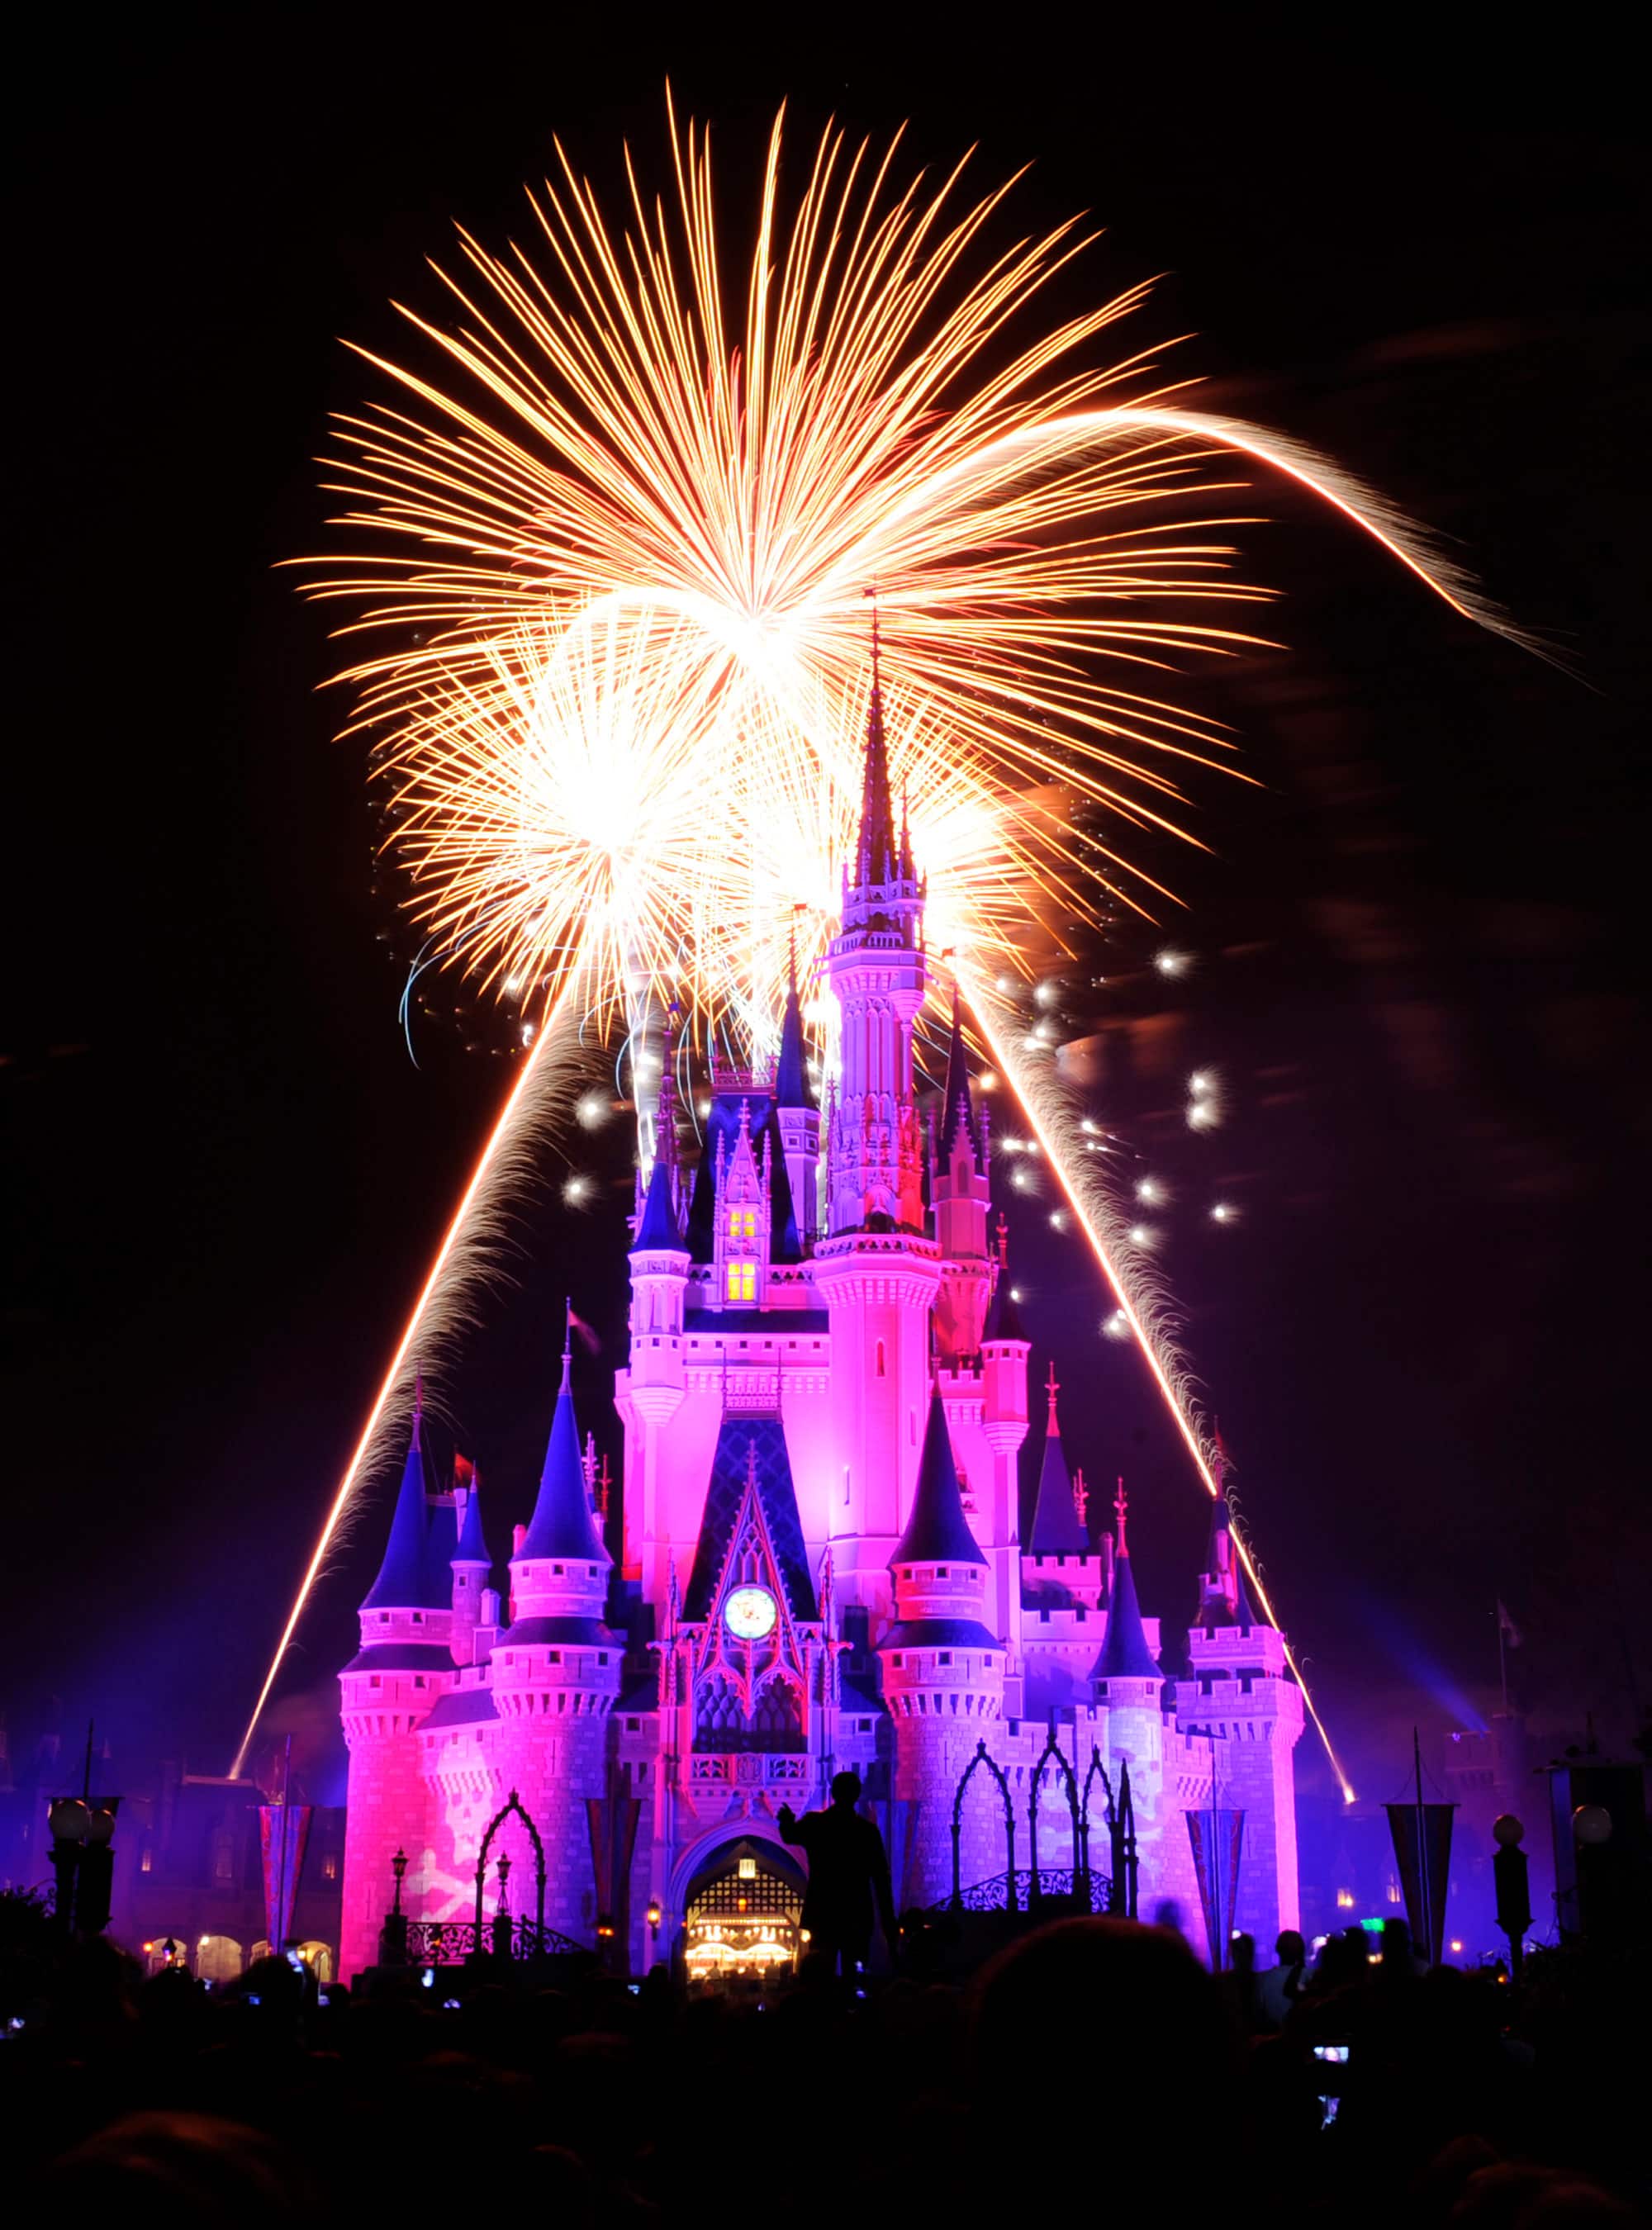 Disney World launches new annual pass: The latest on global Disney